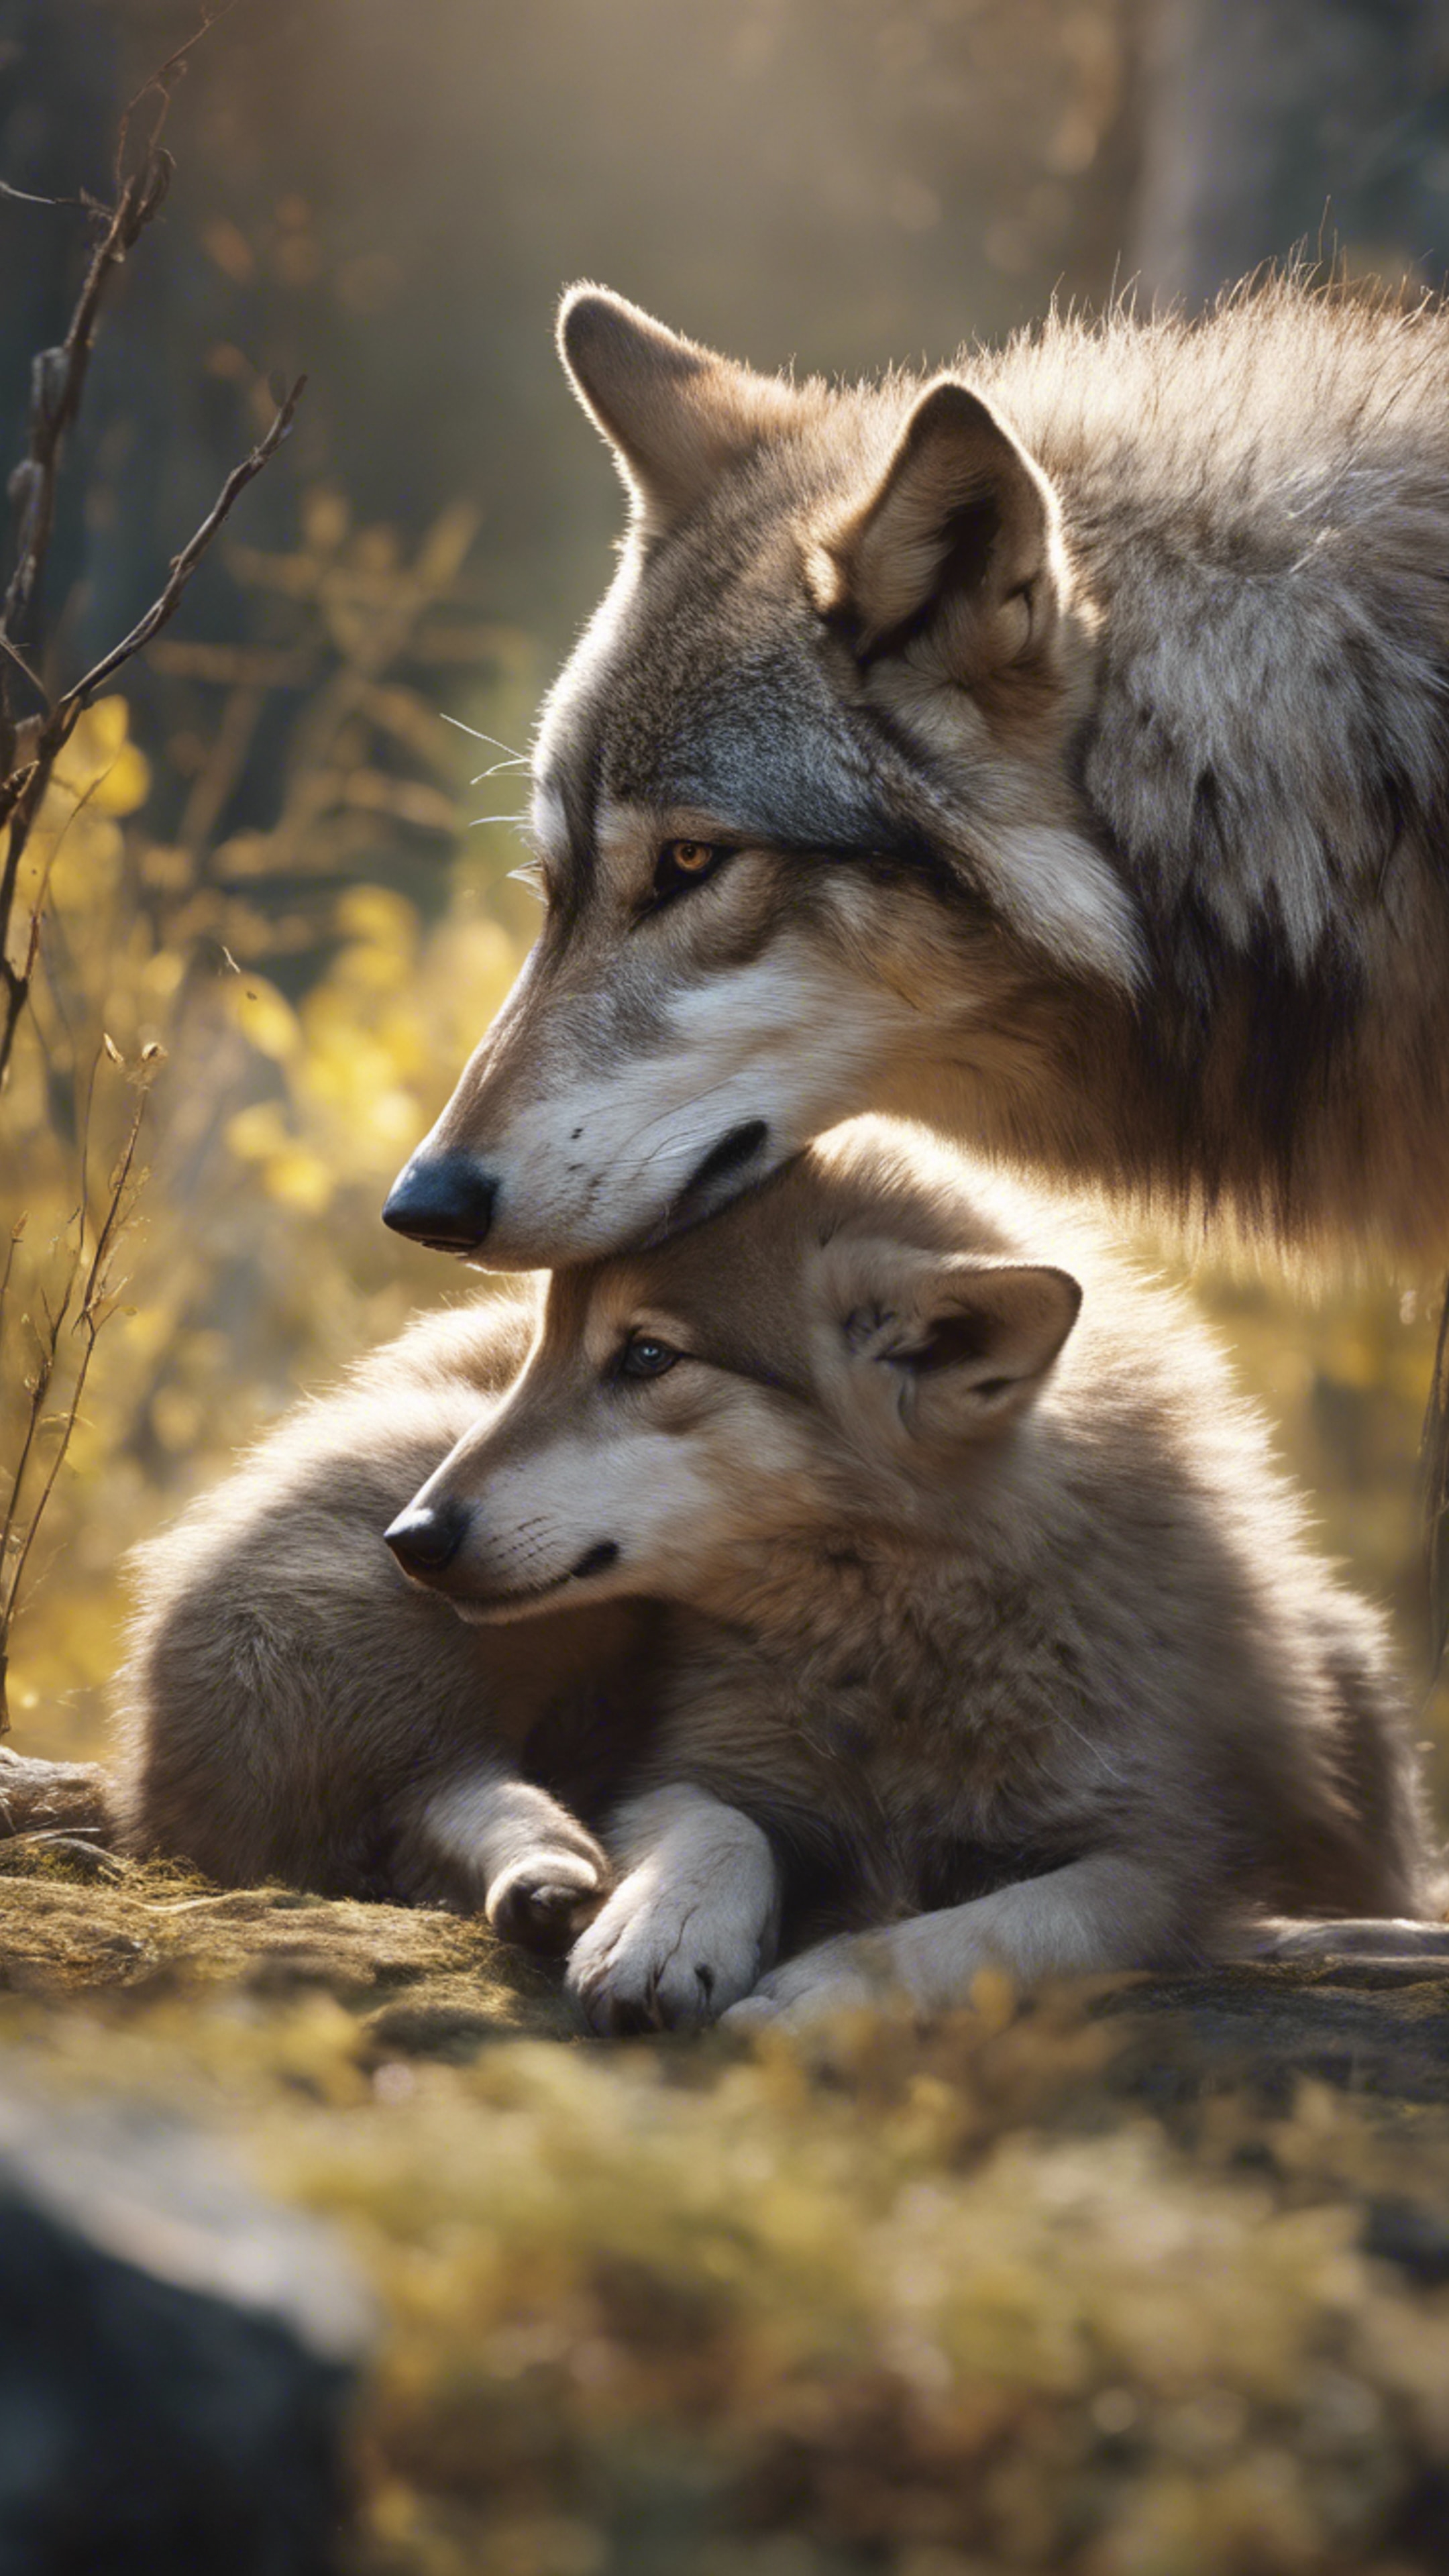 A detailed nature study sketch of a wolf gently caring for its cubs, depicting a tender moment in the wild. Wallpaper[e524e3583fb94688b5f0]